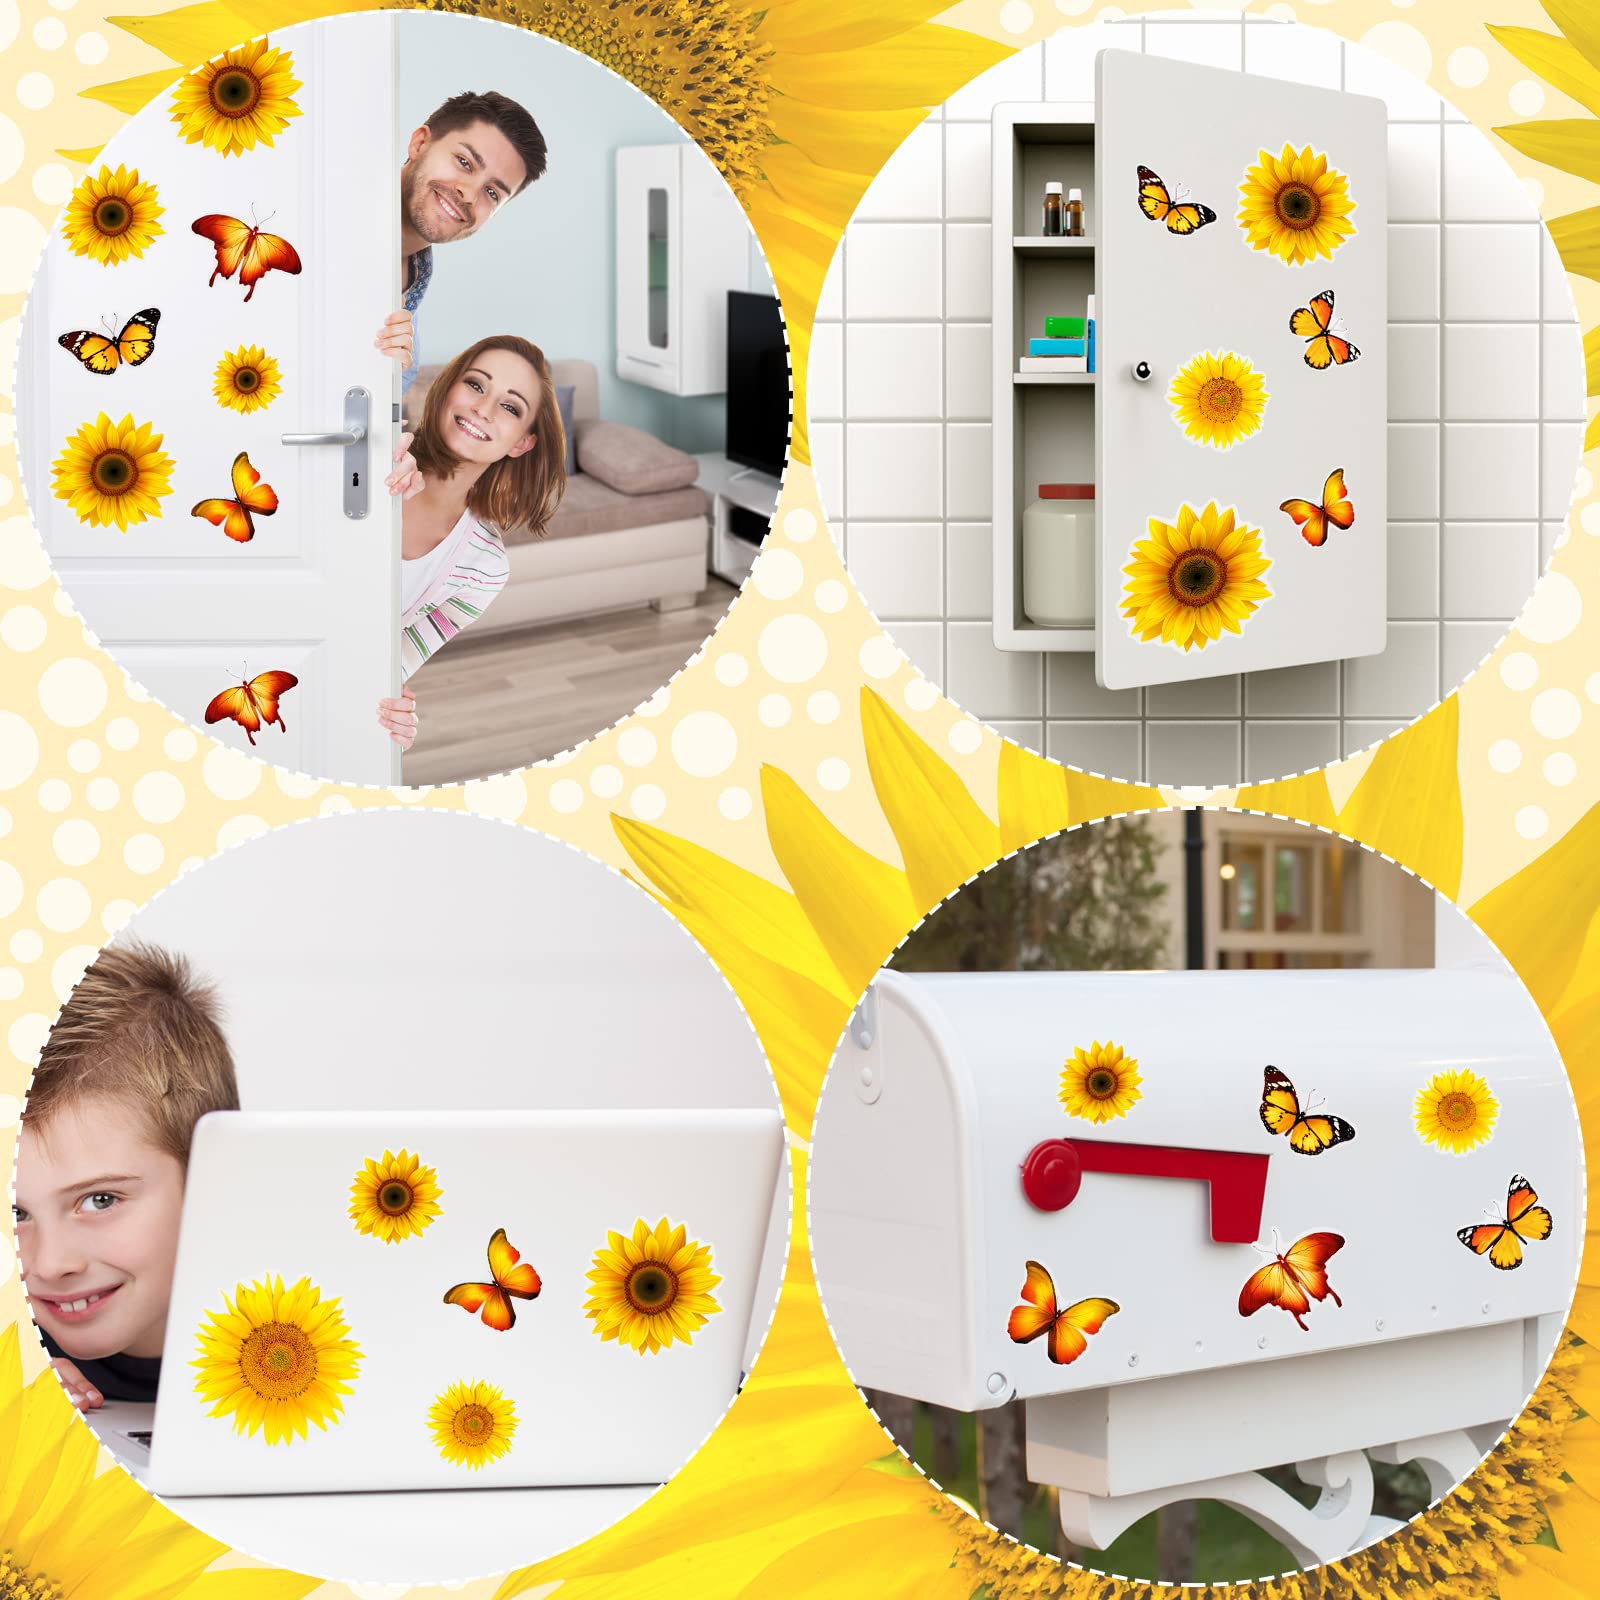 45 Pieces Butterfly Sunflower Magnet Car Refrigerator Magnets Removable Butterfly Sunflower Kitchen Decor and Accessories Cute Flower Magnets Vintage Magnets for Whiteboard Home Office